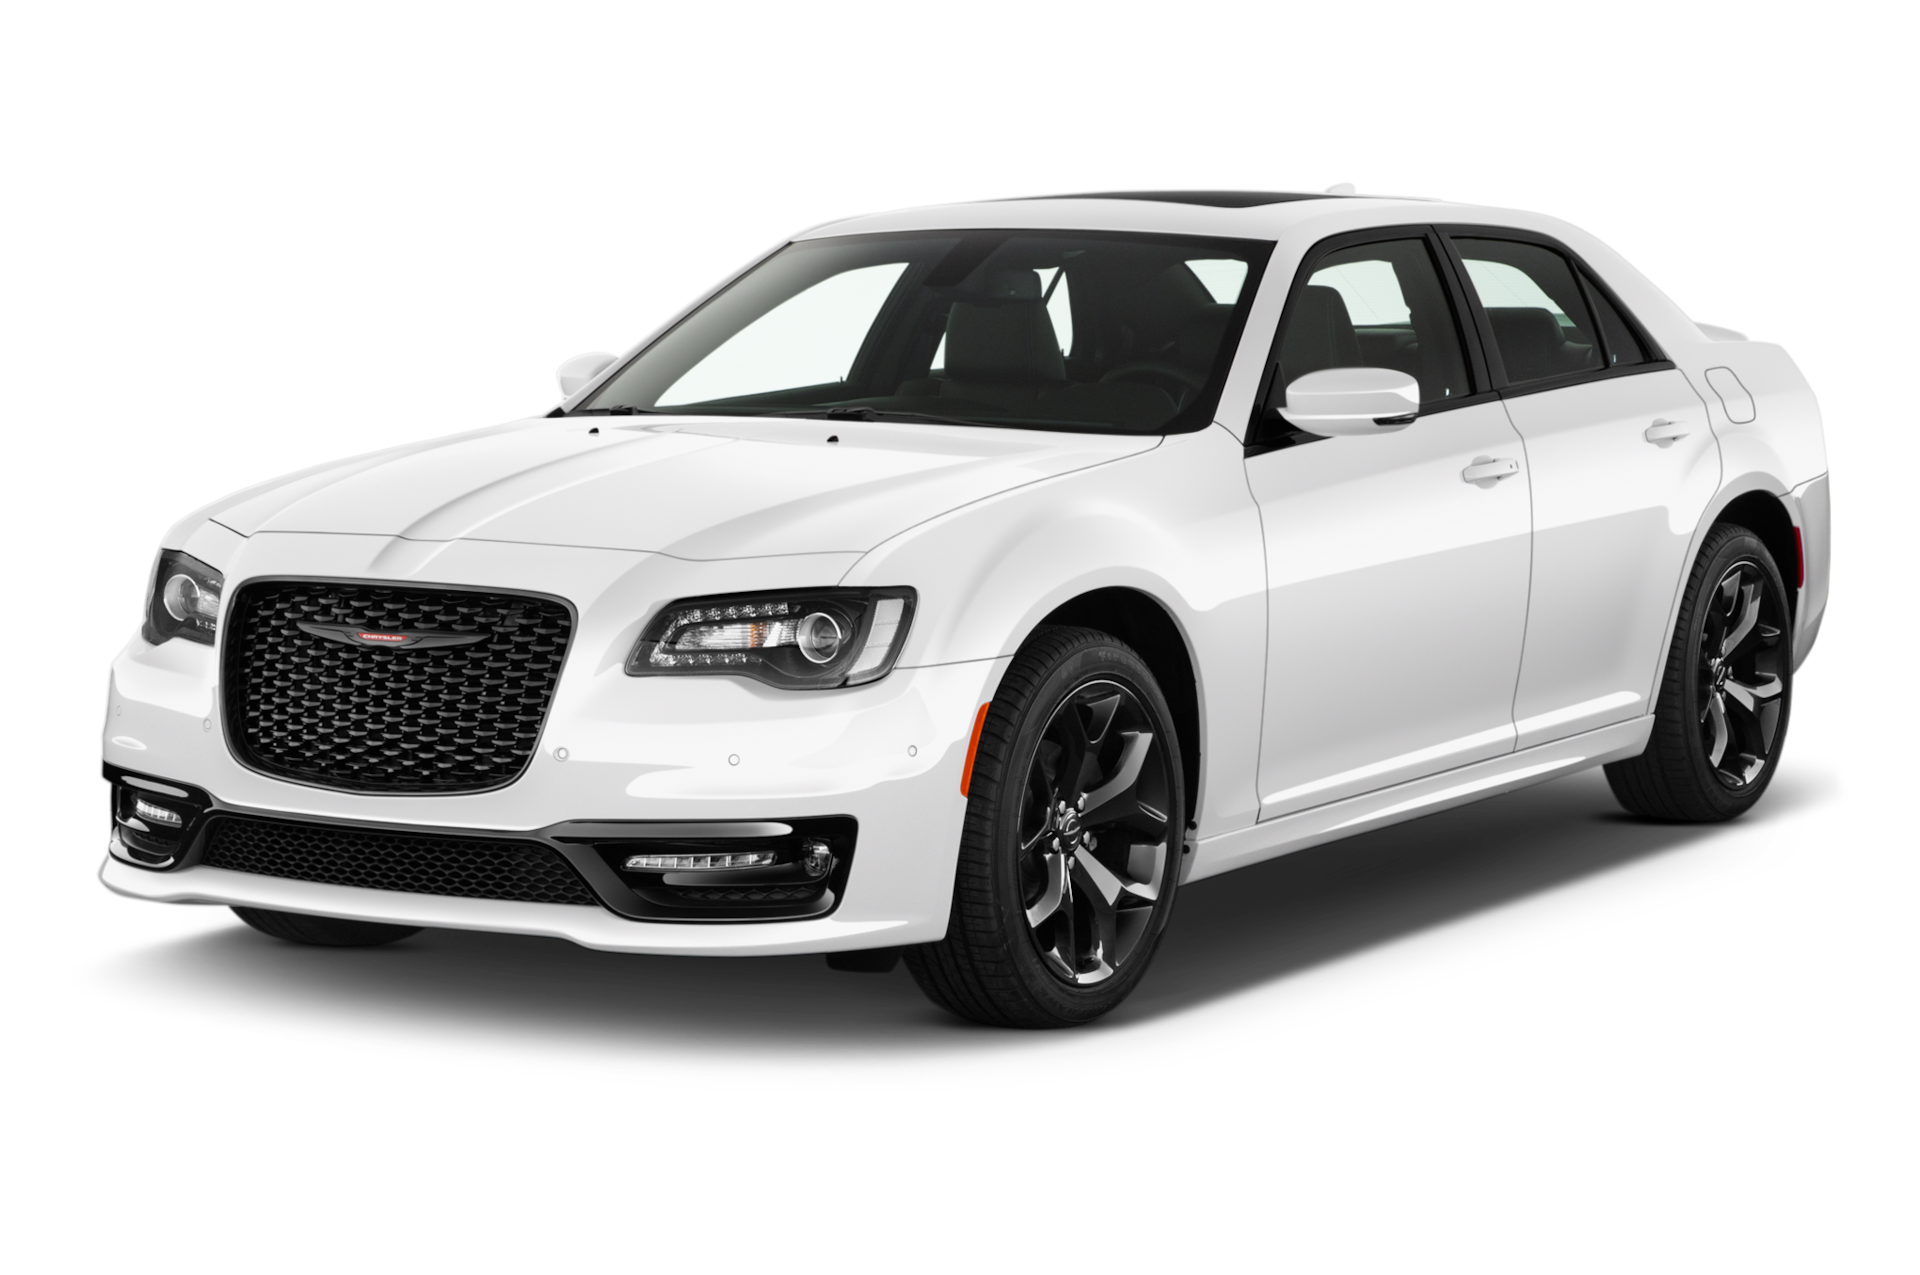 2021 Chrysler 300 Prices, Reviews, and Photos - MotorTrend